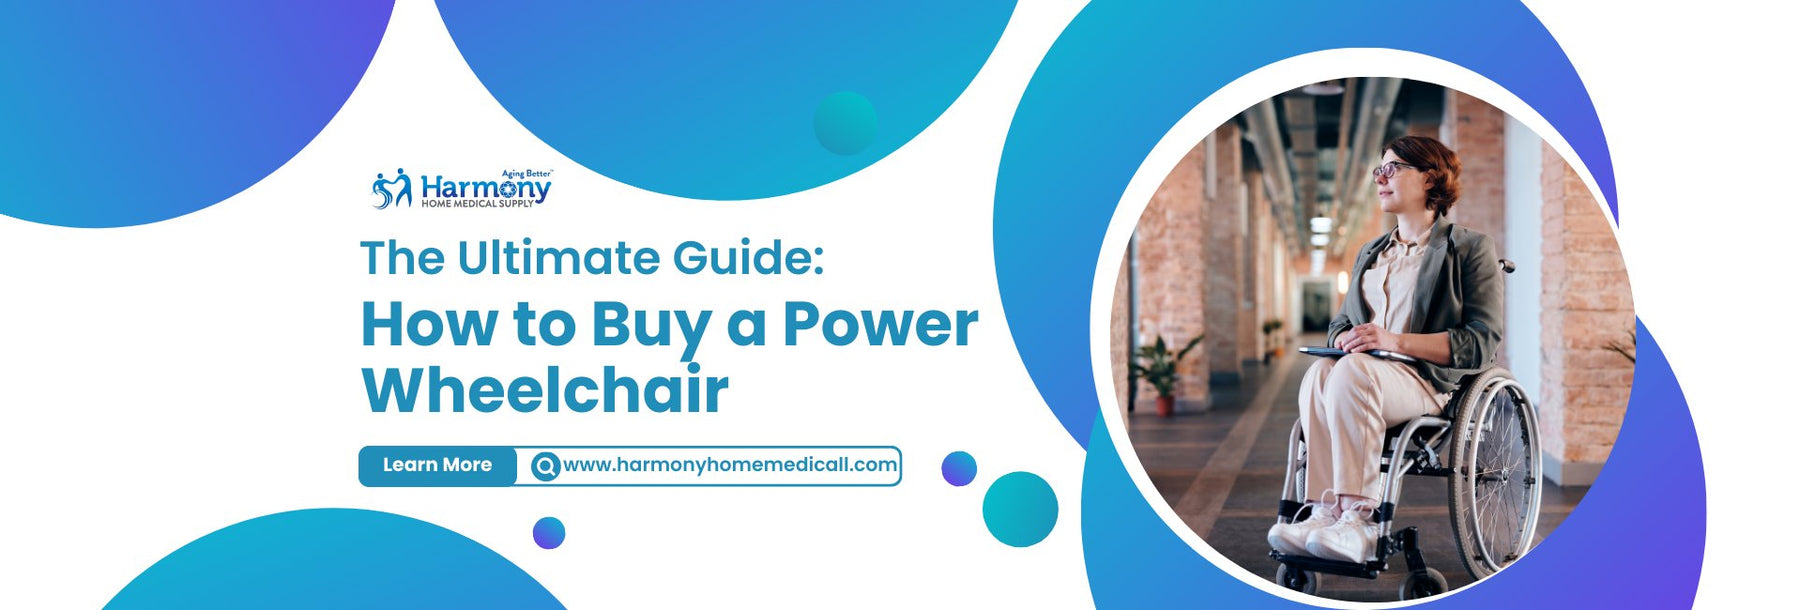 The Ultimate Guide: How to Buy a Power Wheelchair - Harmony Home Medical Supply